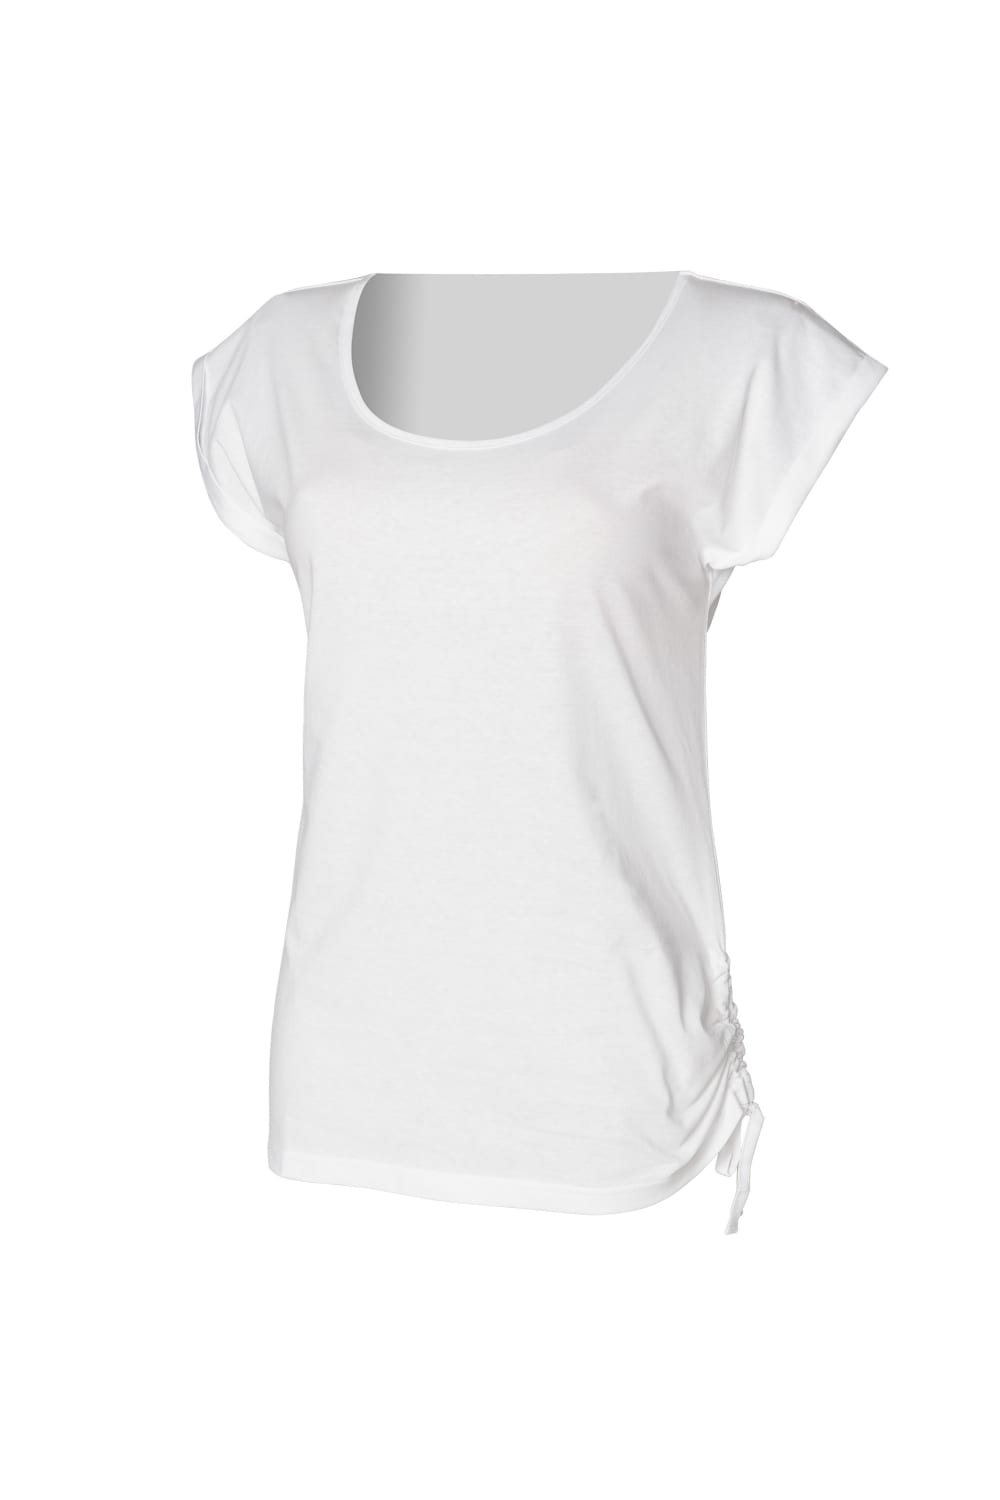 Skinni Fit Ladies/Womens Slounge T-Shirt Top (White)